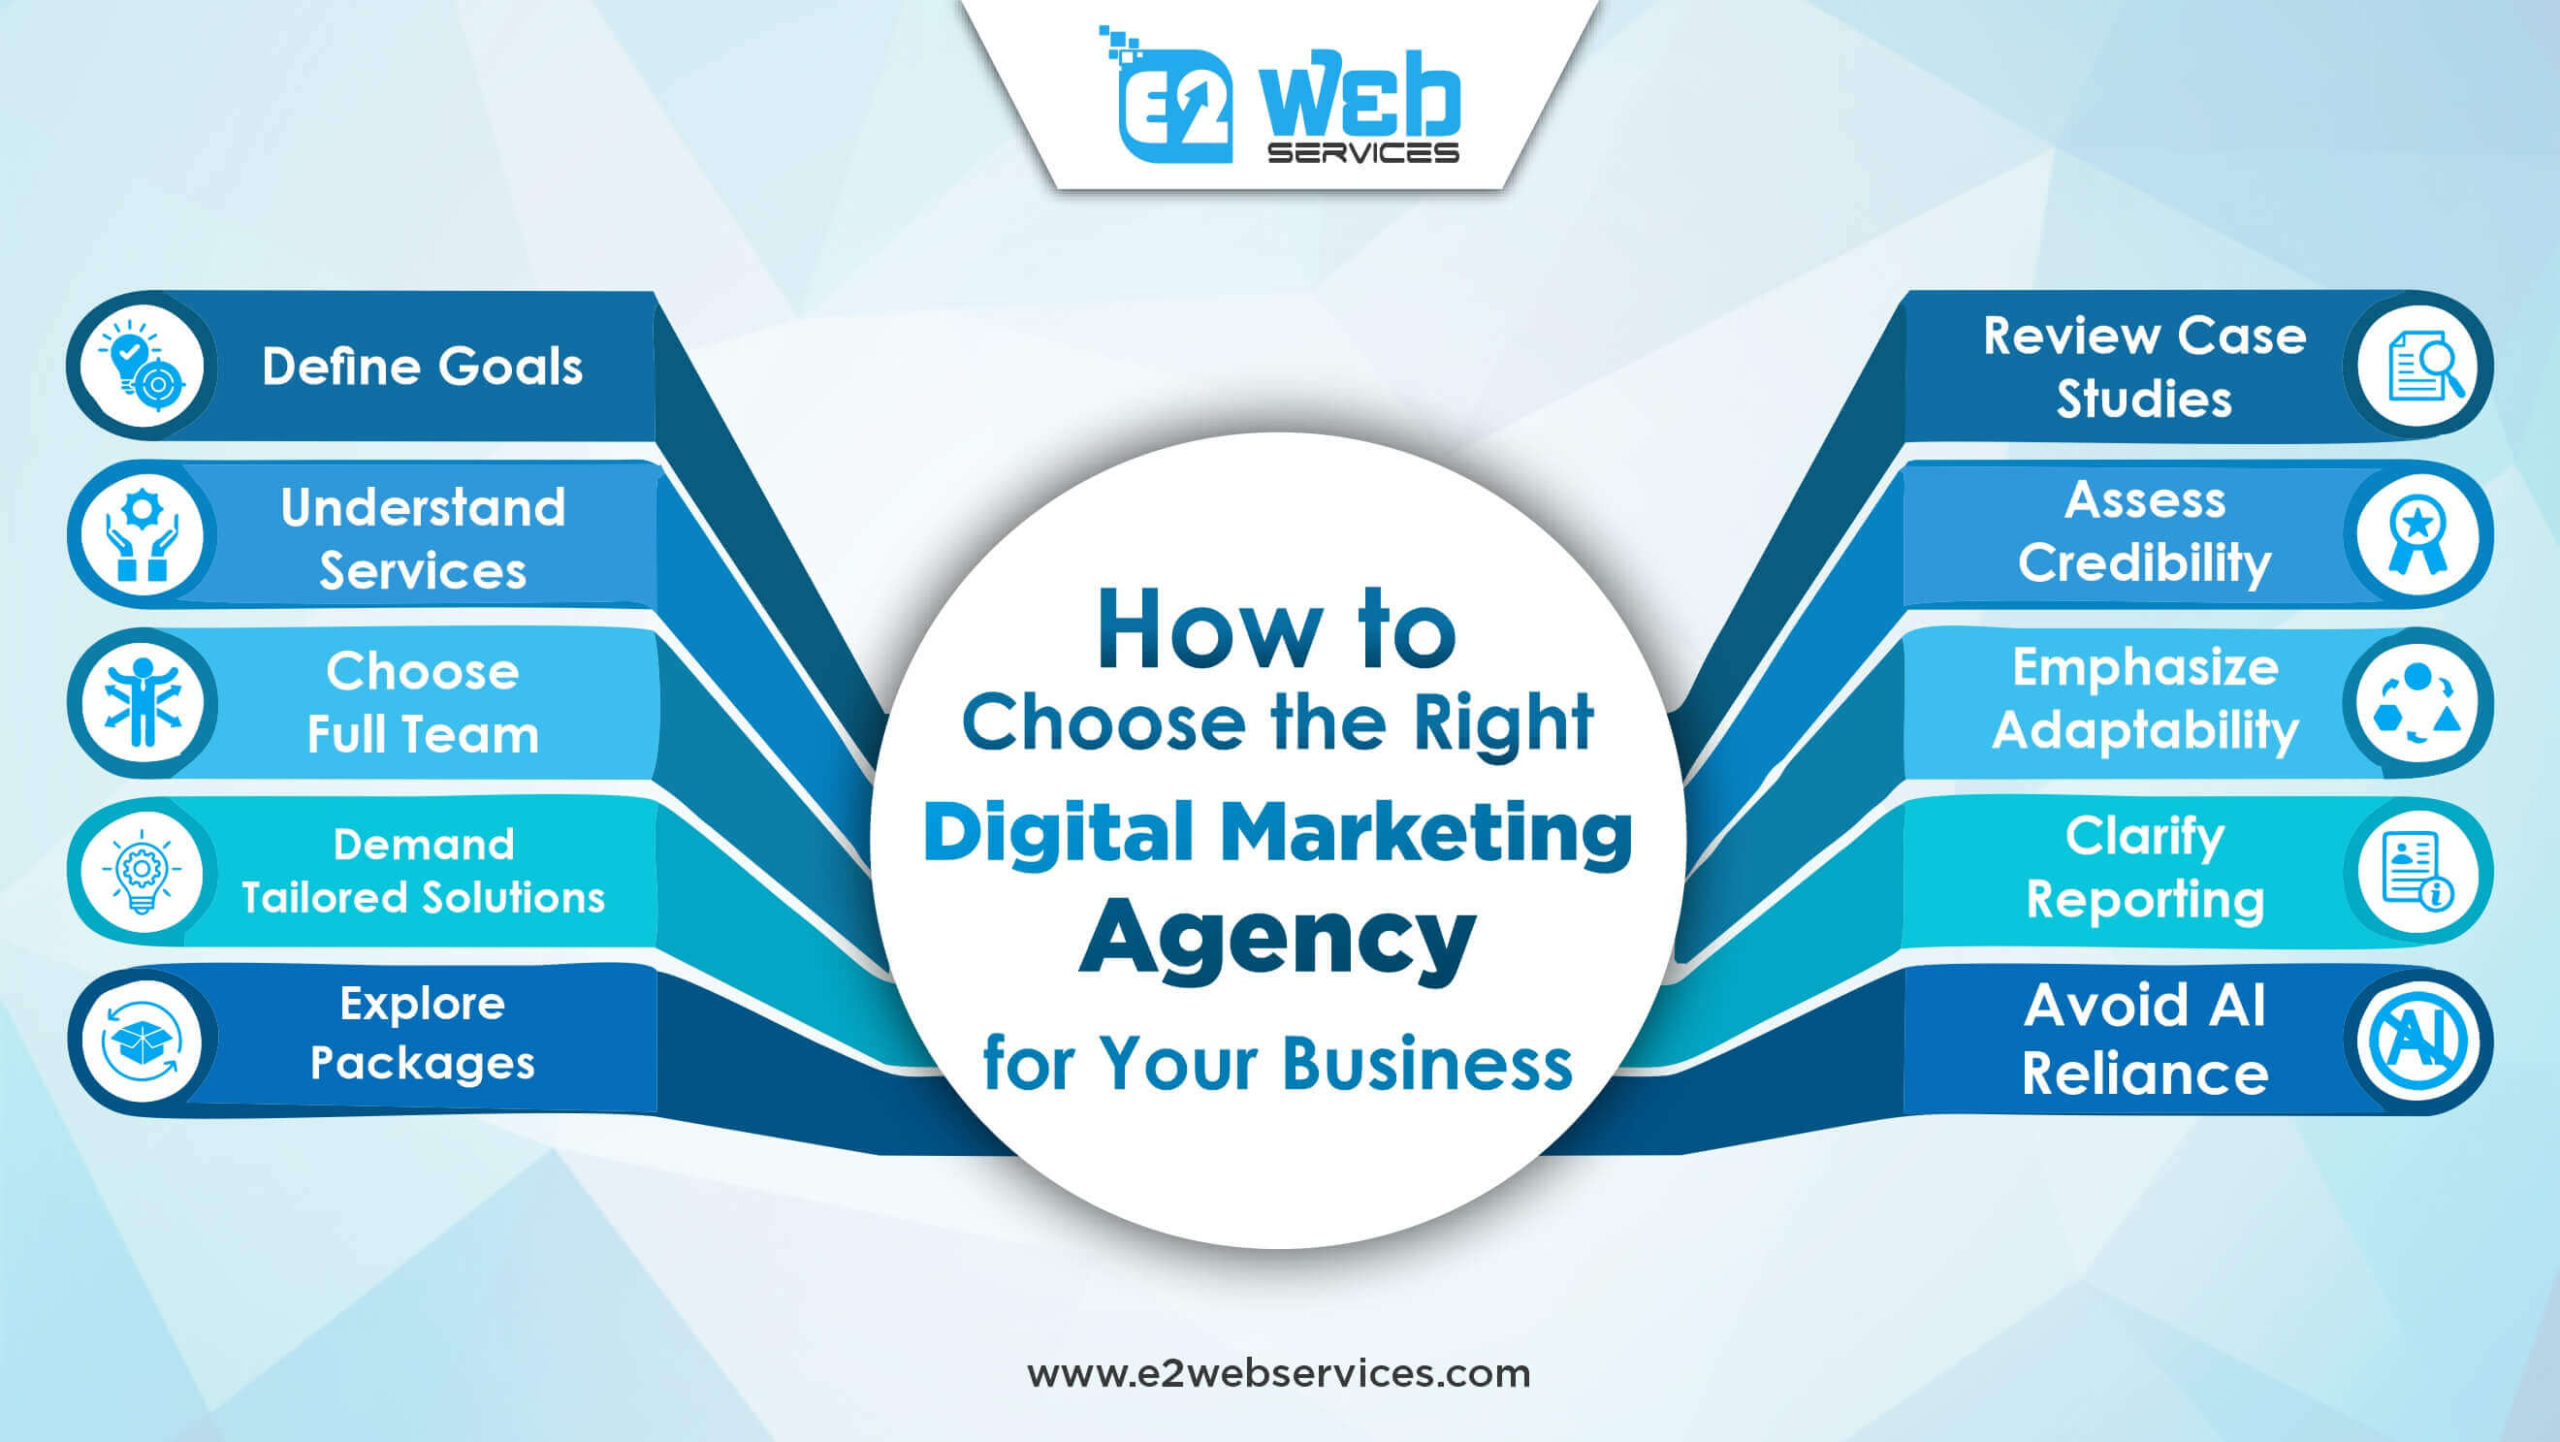 digital-marketing-agency-for-your-business